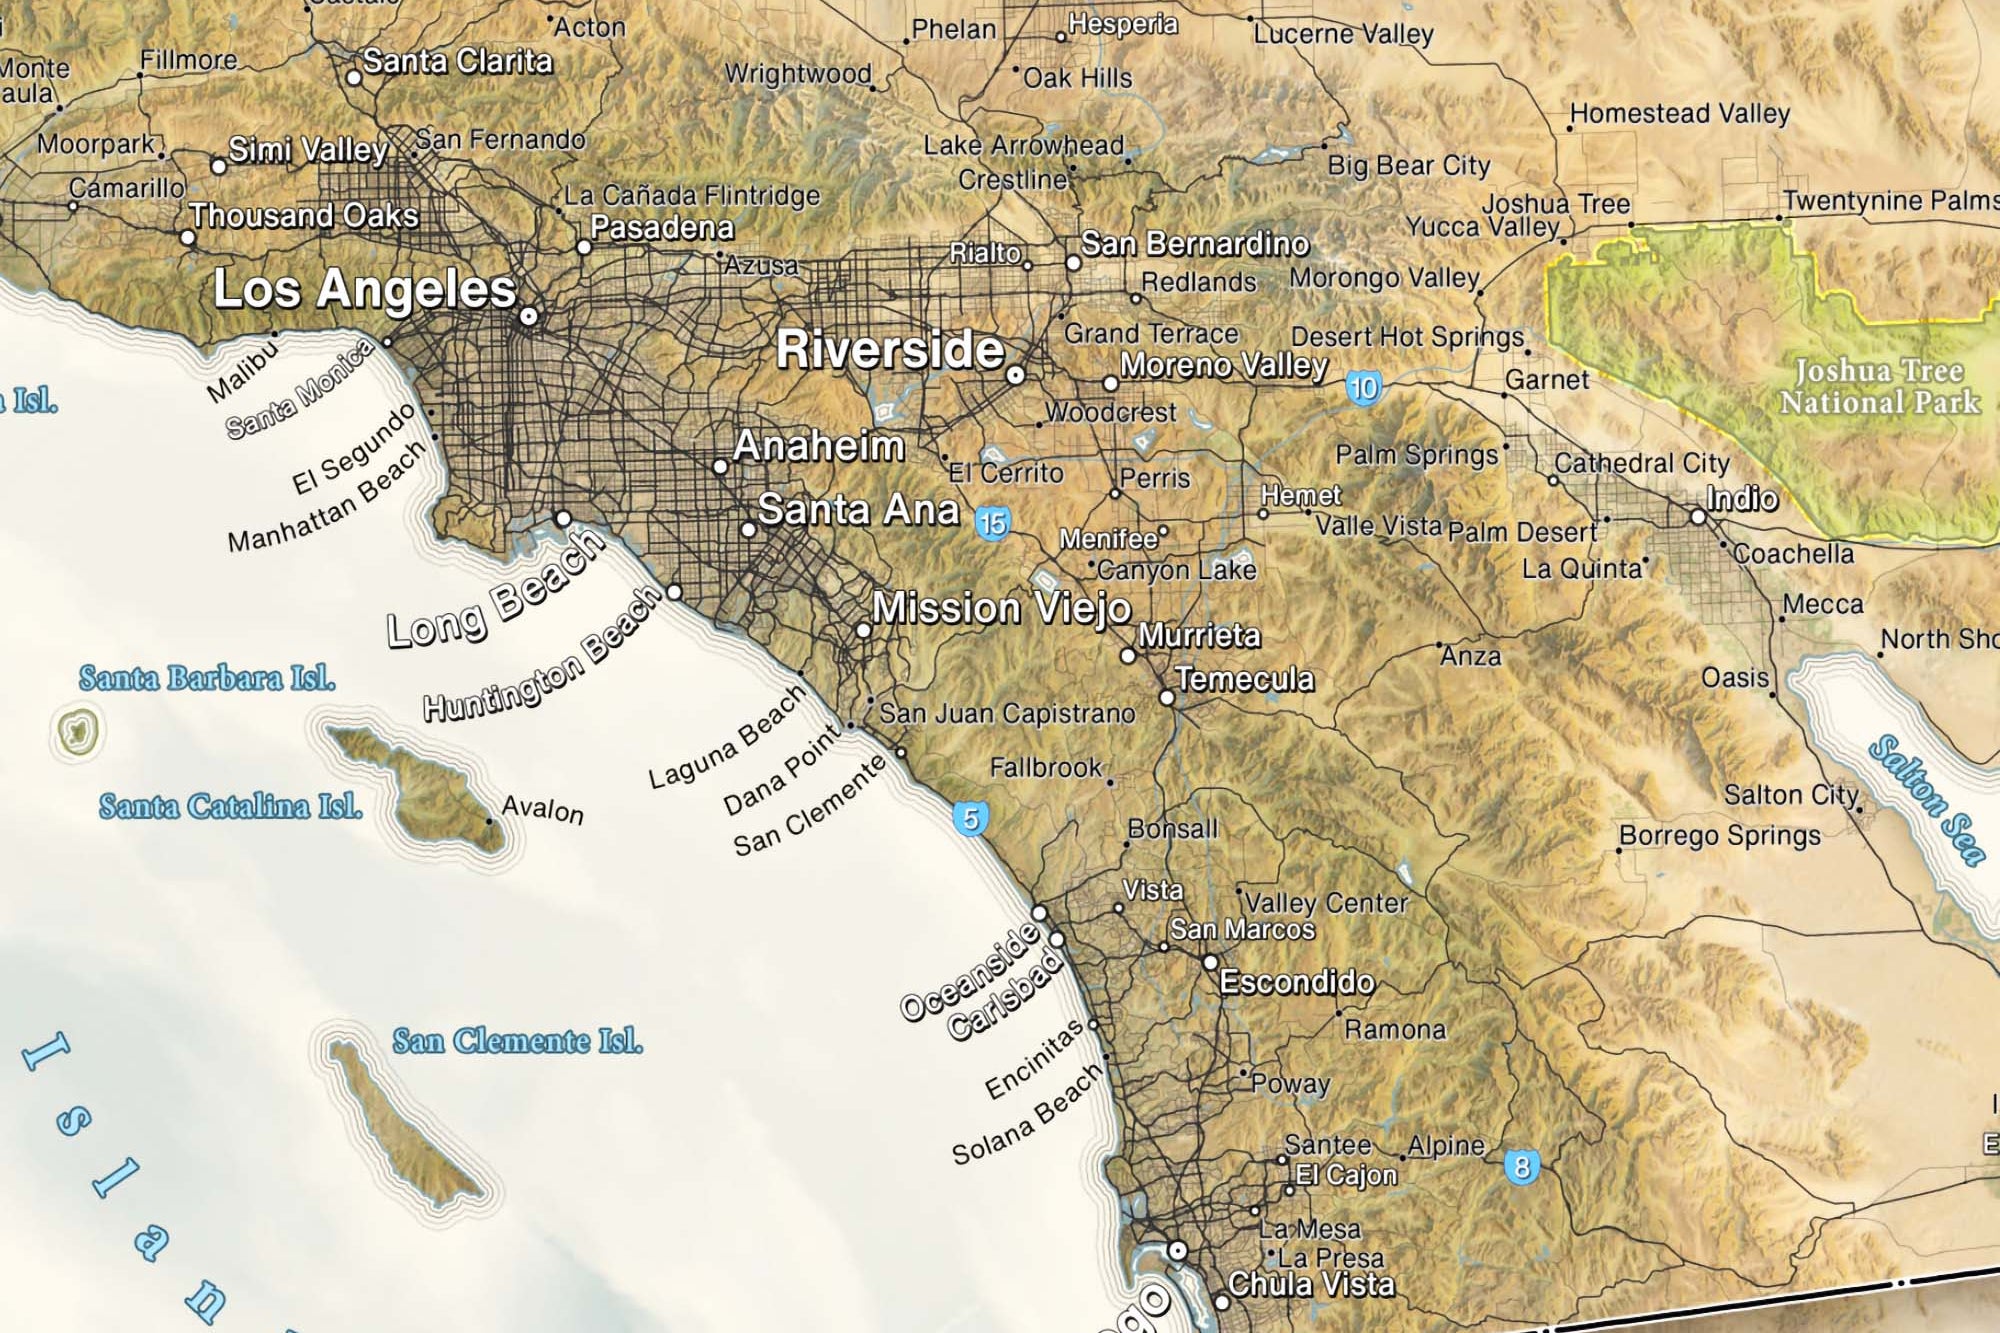 Topographic details of LA and the San Gabriels